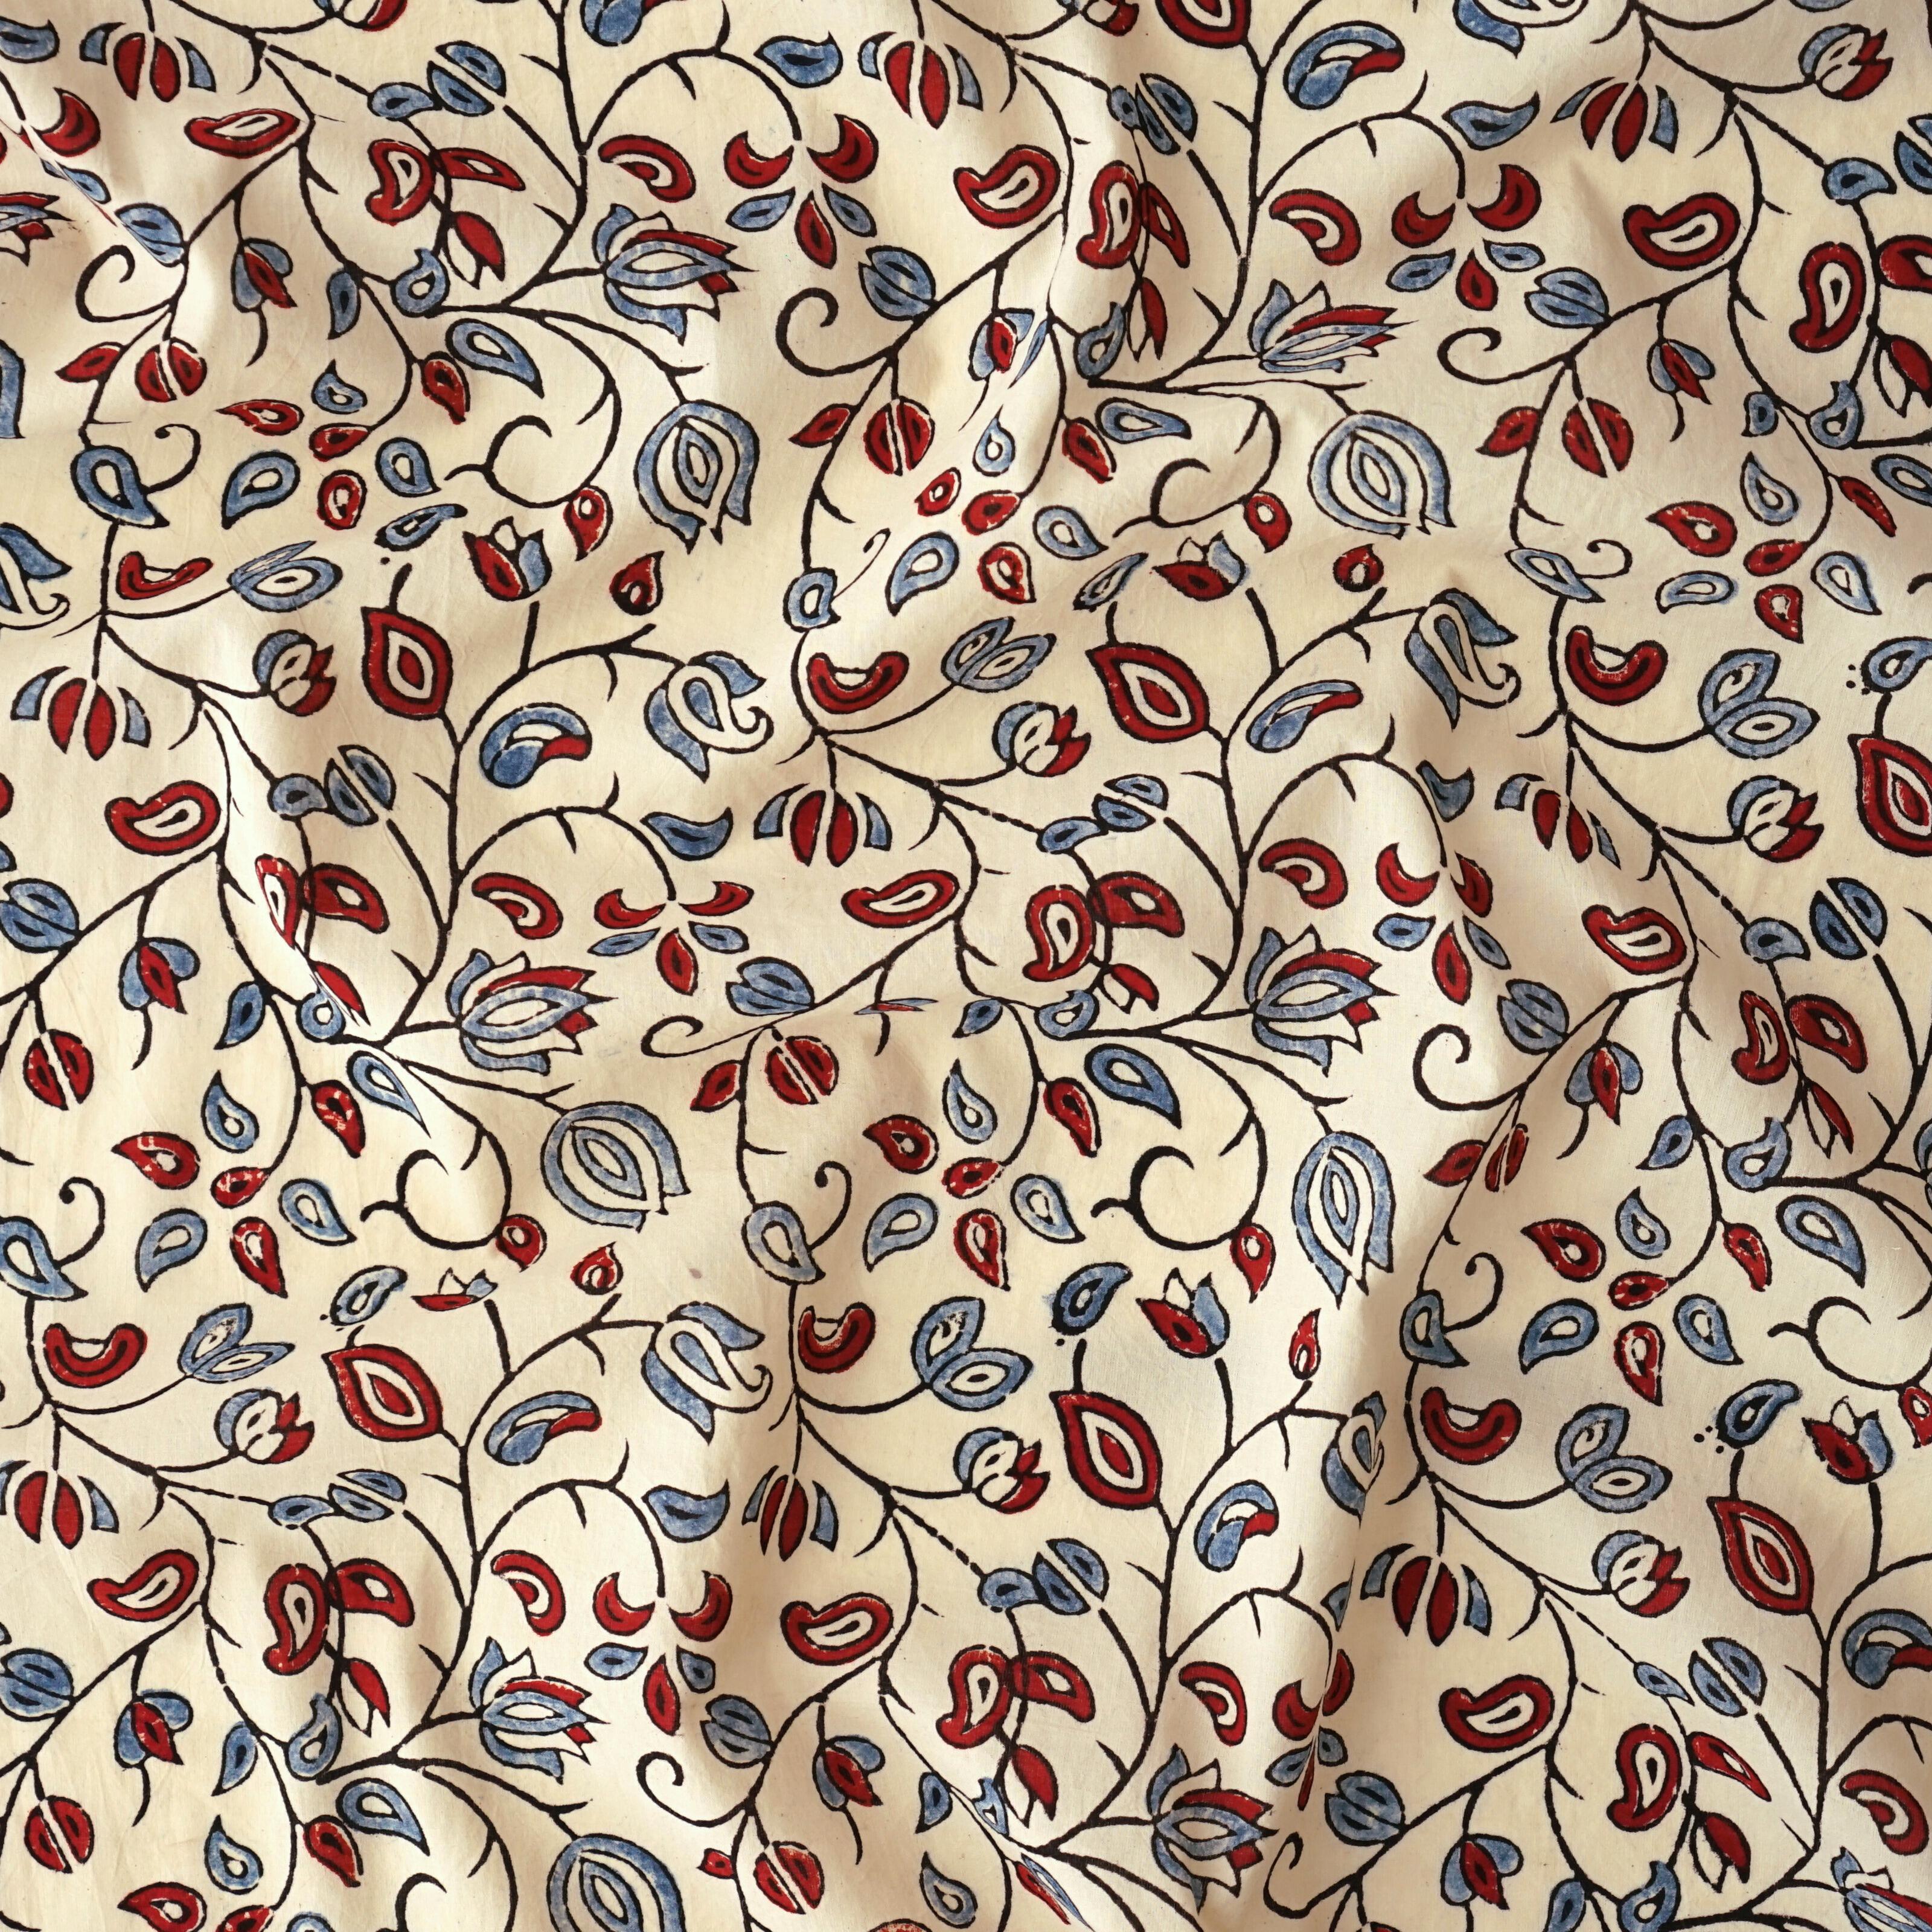 Block-Printed Cotton - Climbing Print -  Alizarin Red, Indigo and Black Dyes - Contrast